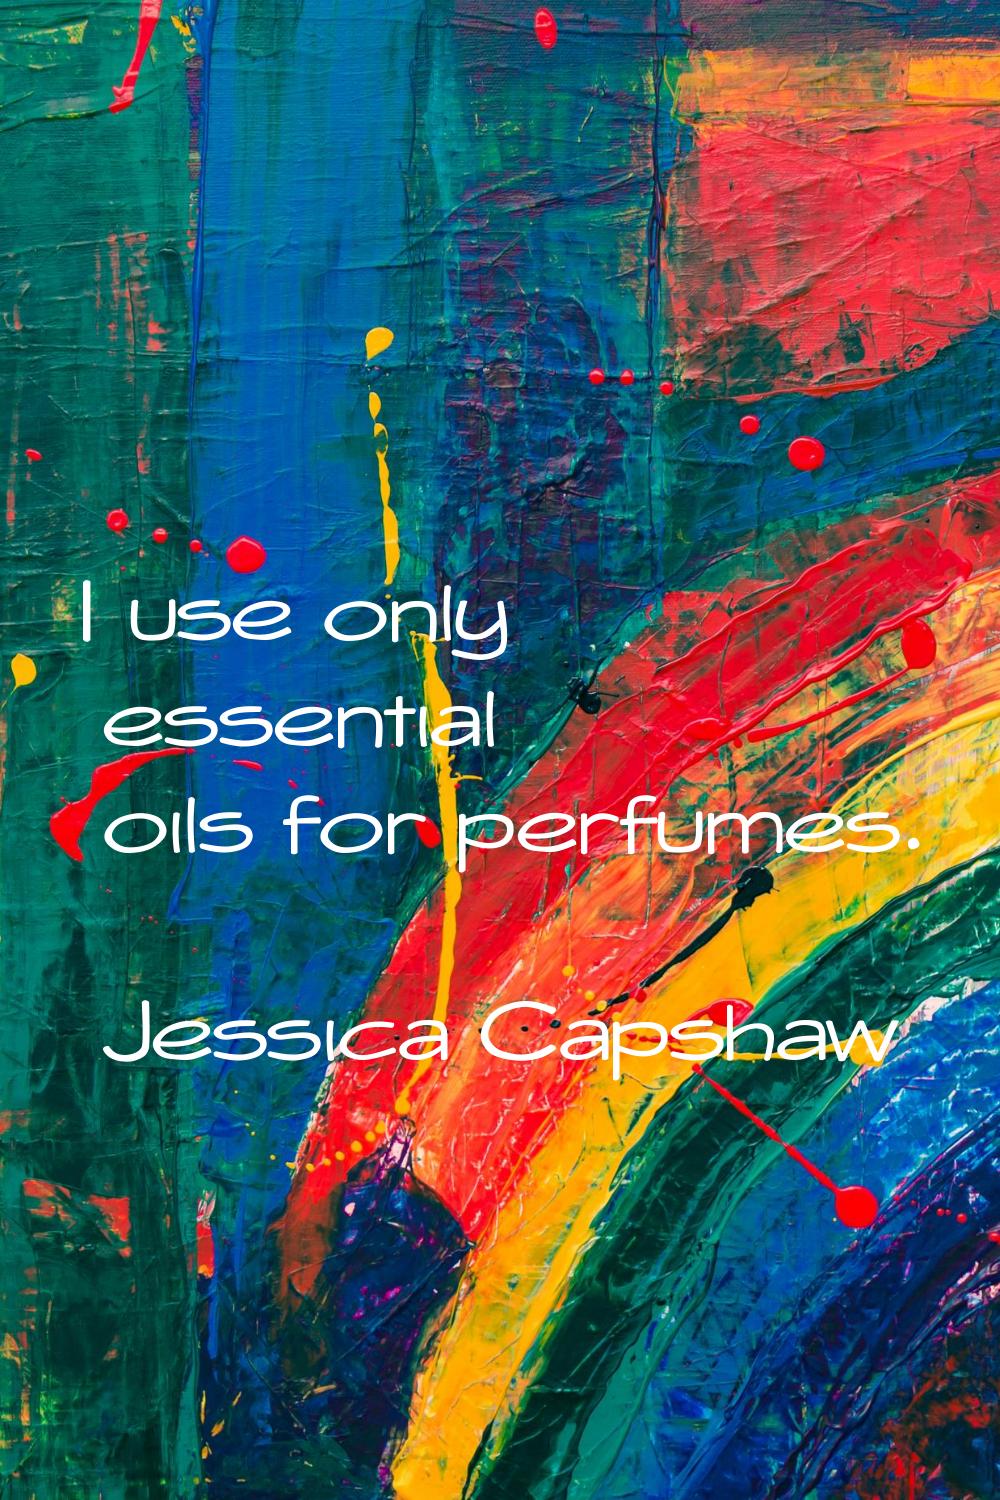 I use only essential oils for perfumes.